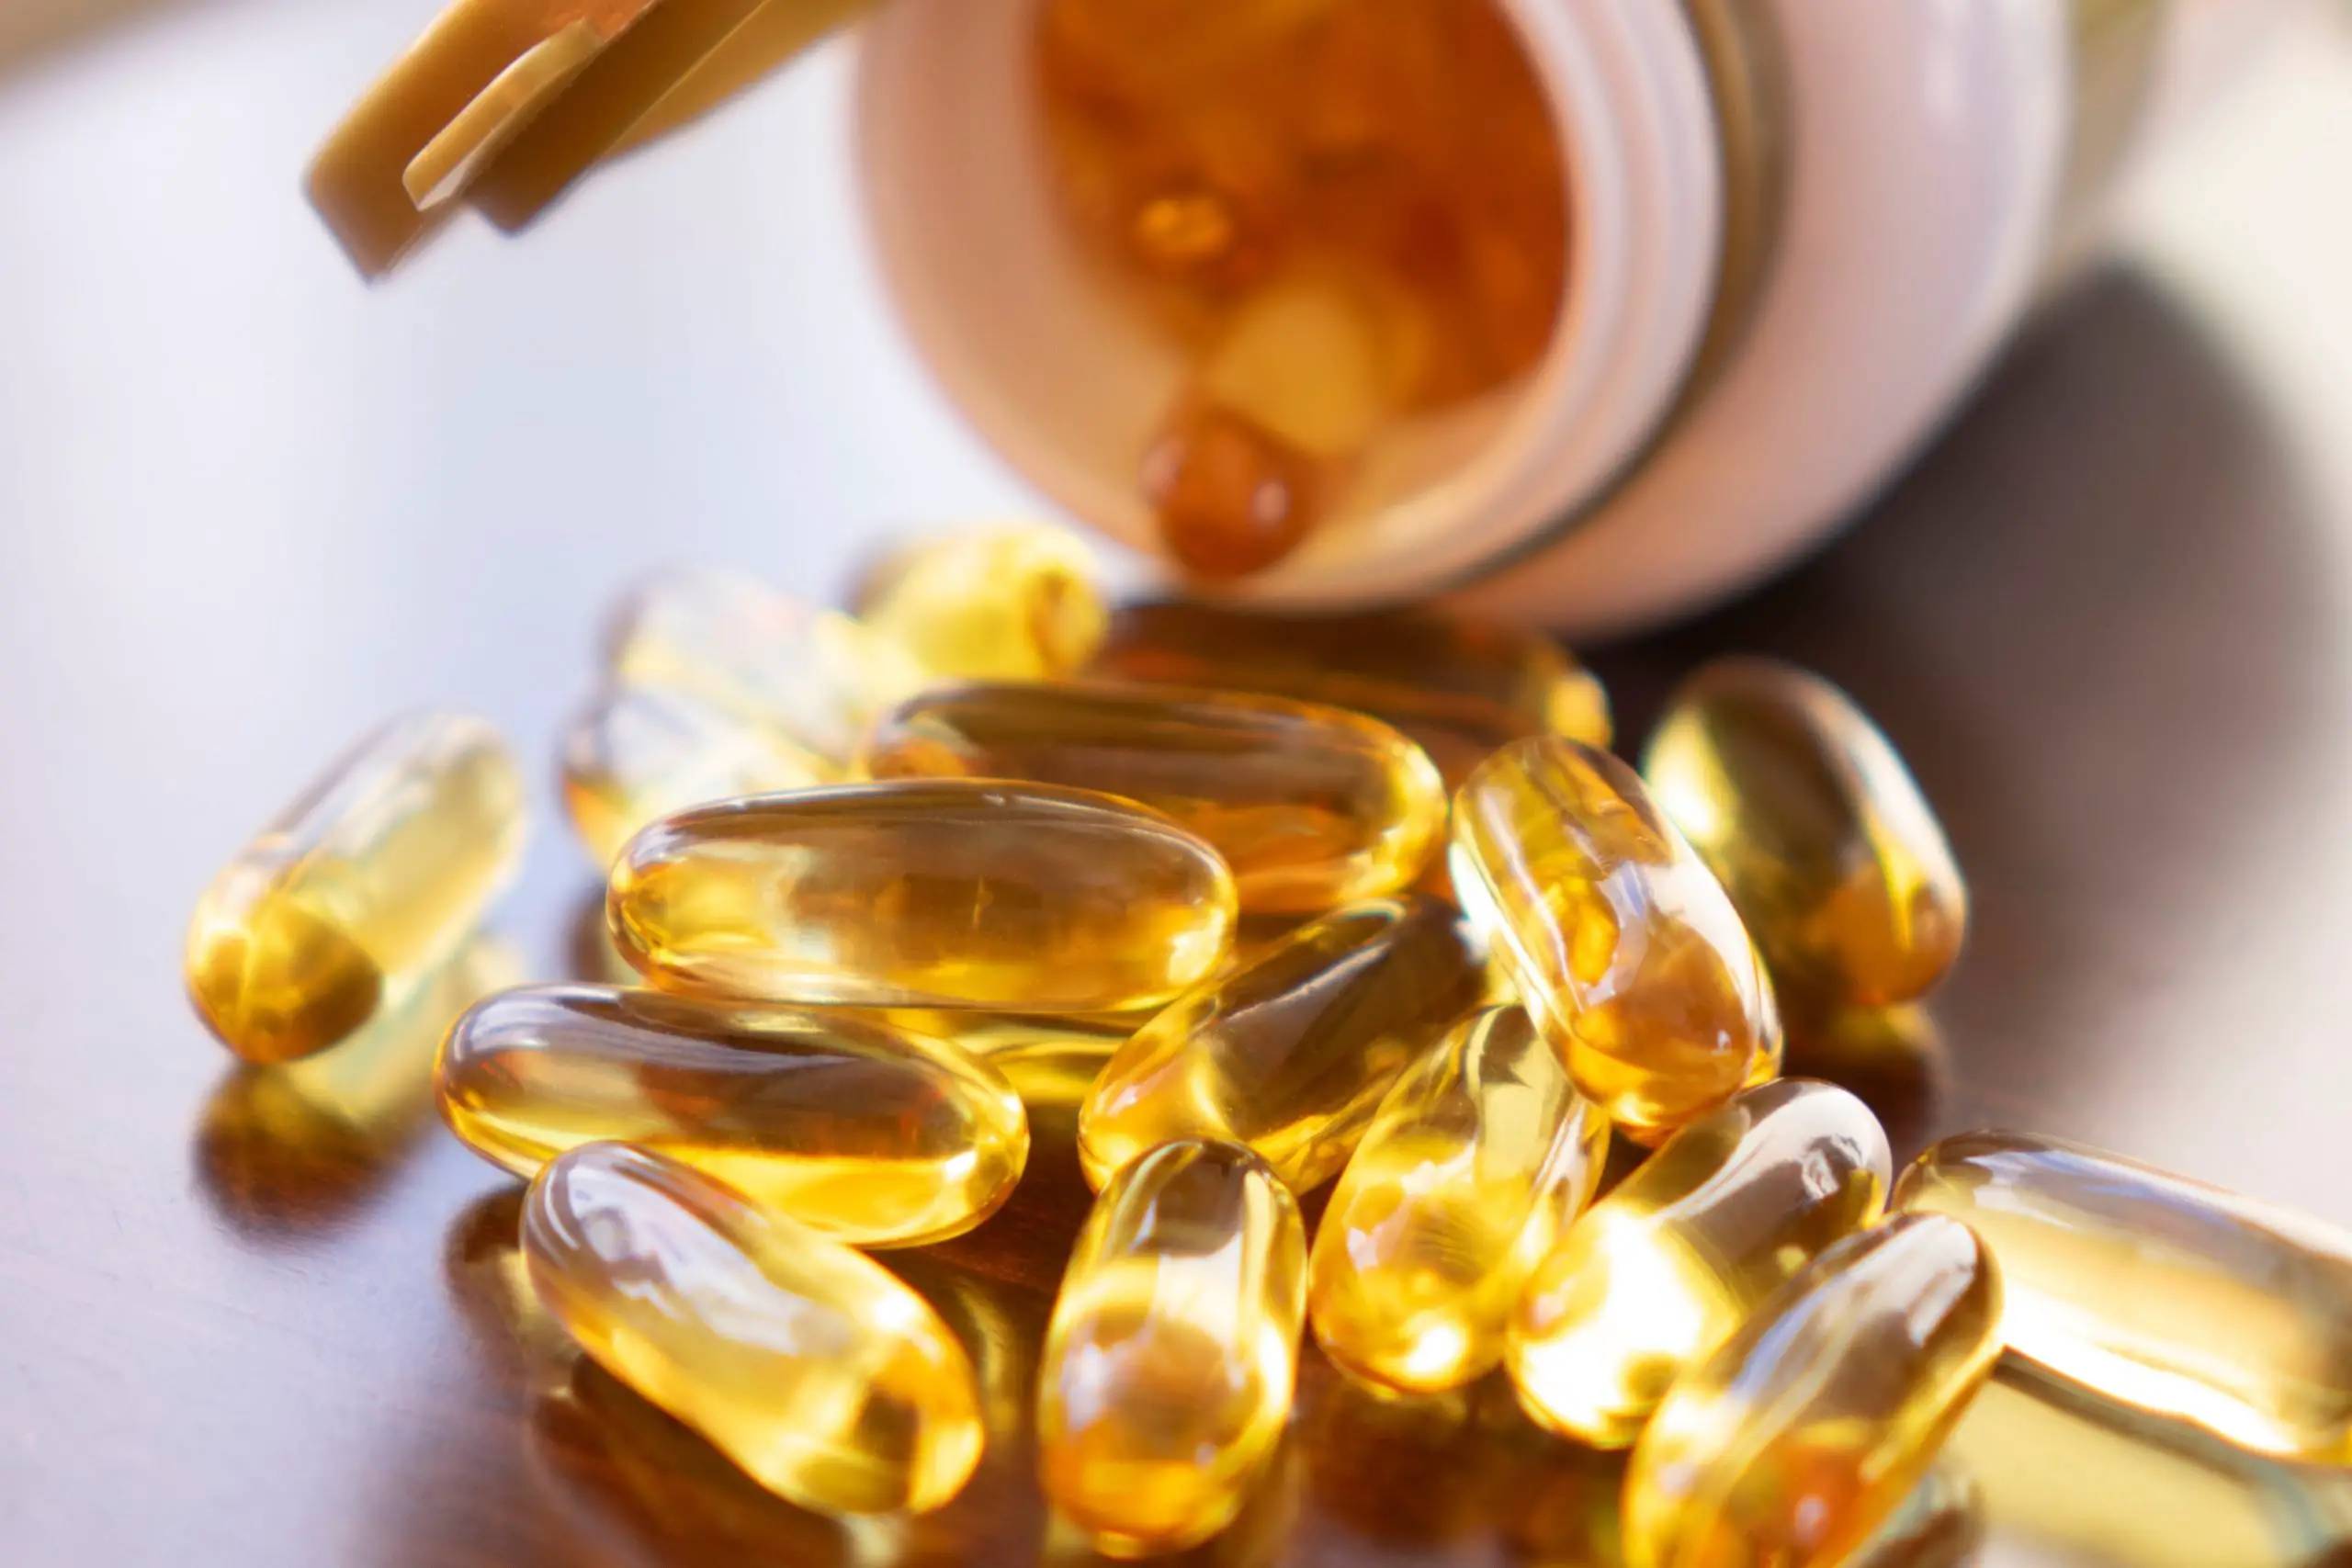 What Is Fish Oil Good For?